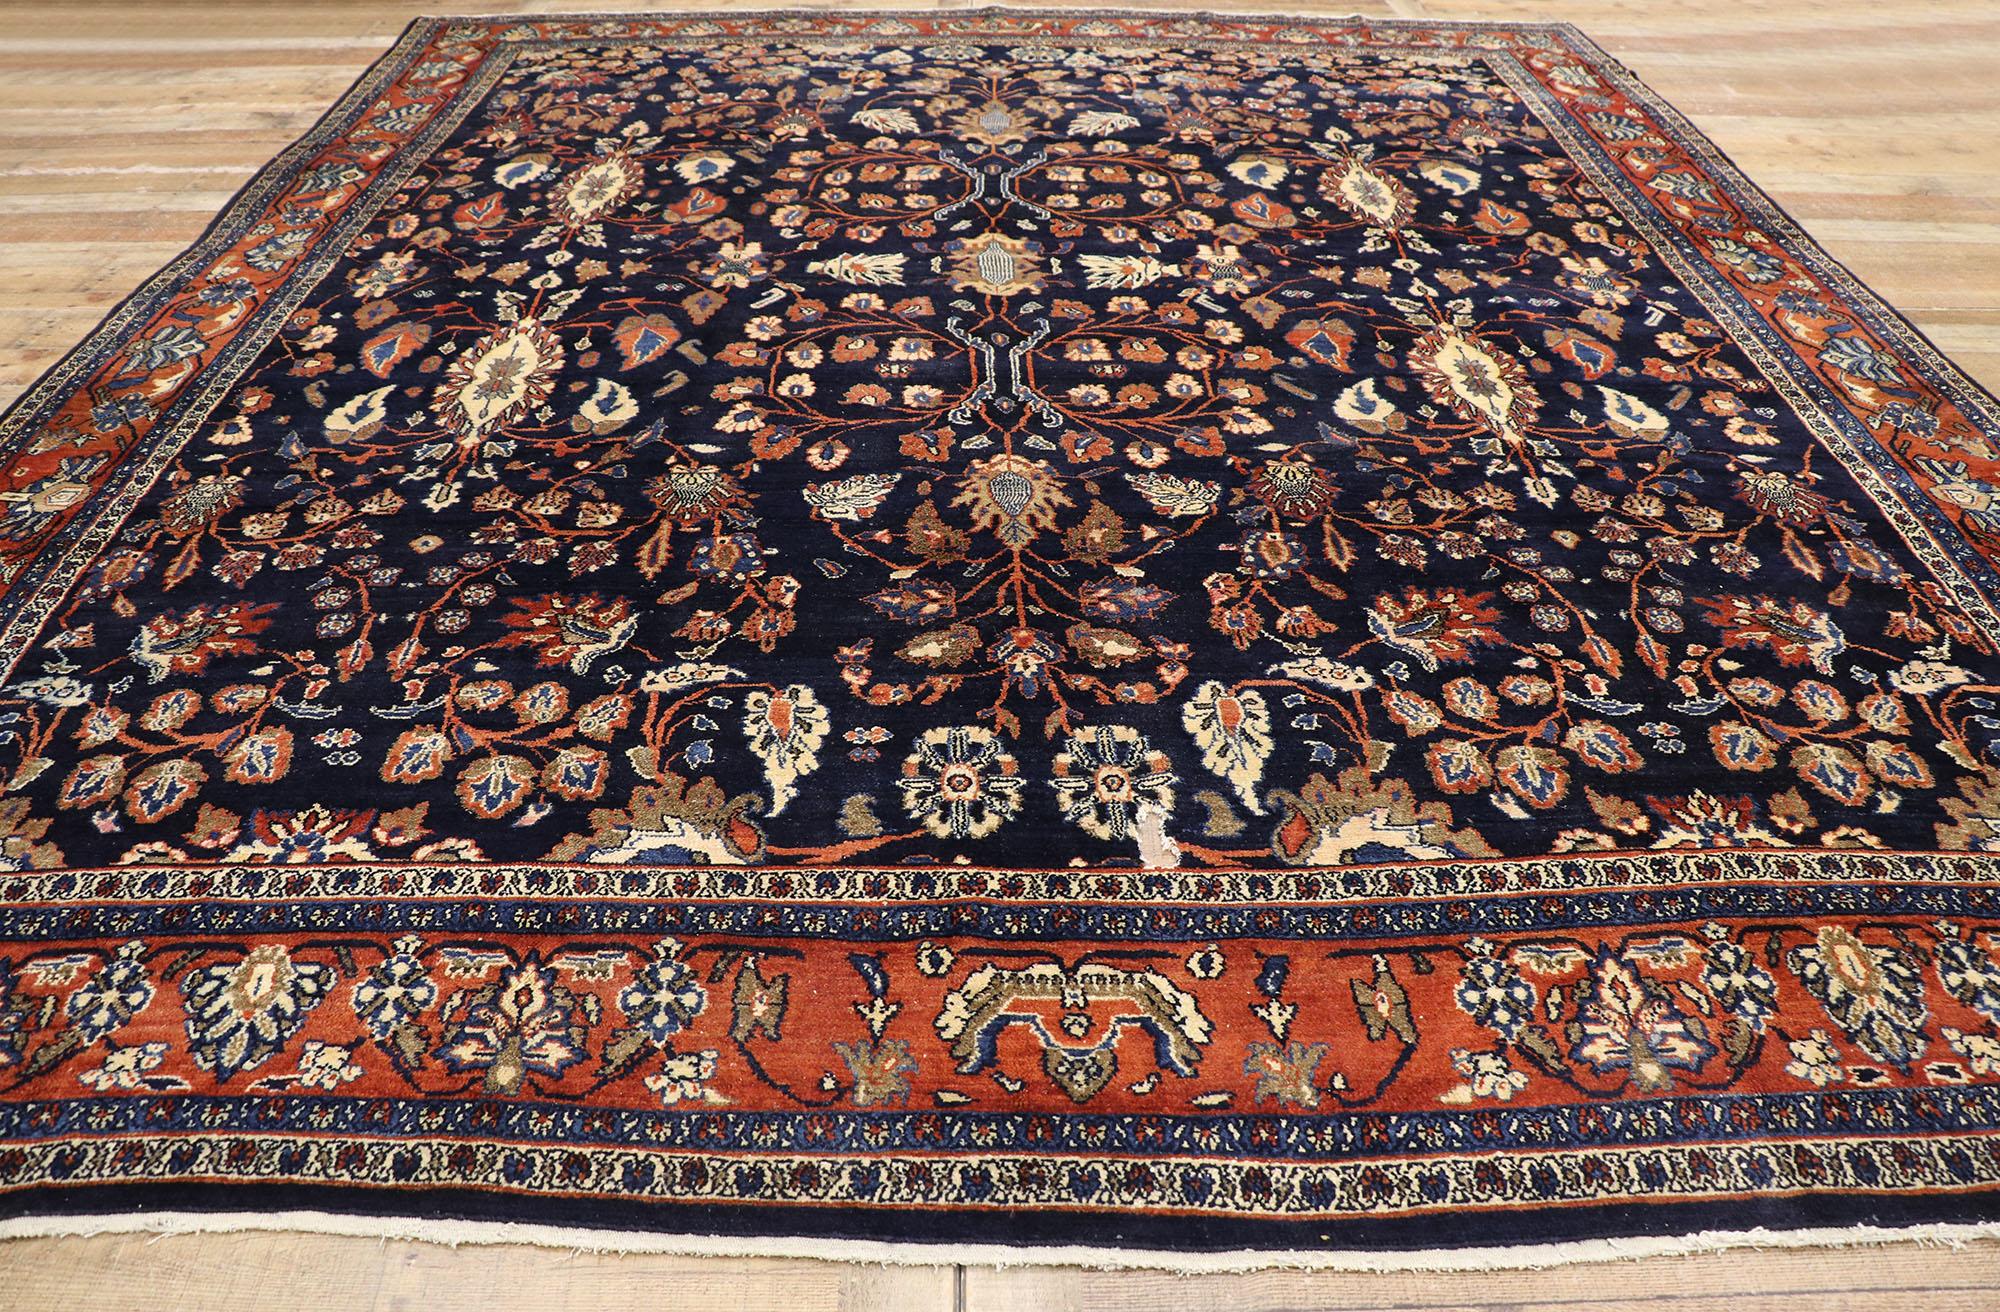 20th Century Antique Persian Bibikabad Rug with Old World French Chateau Style For Sale